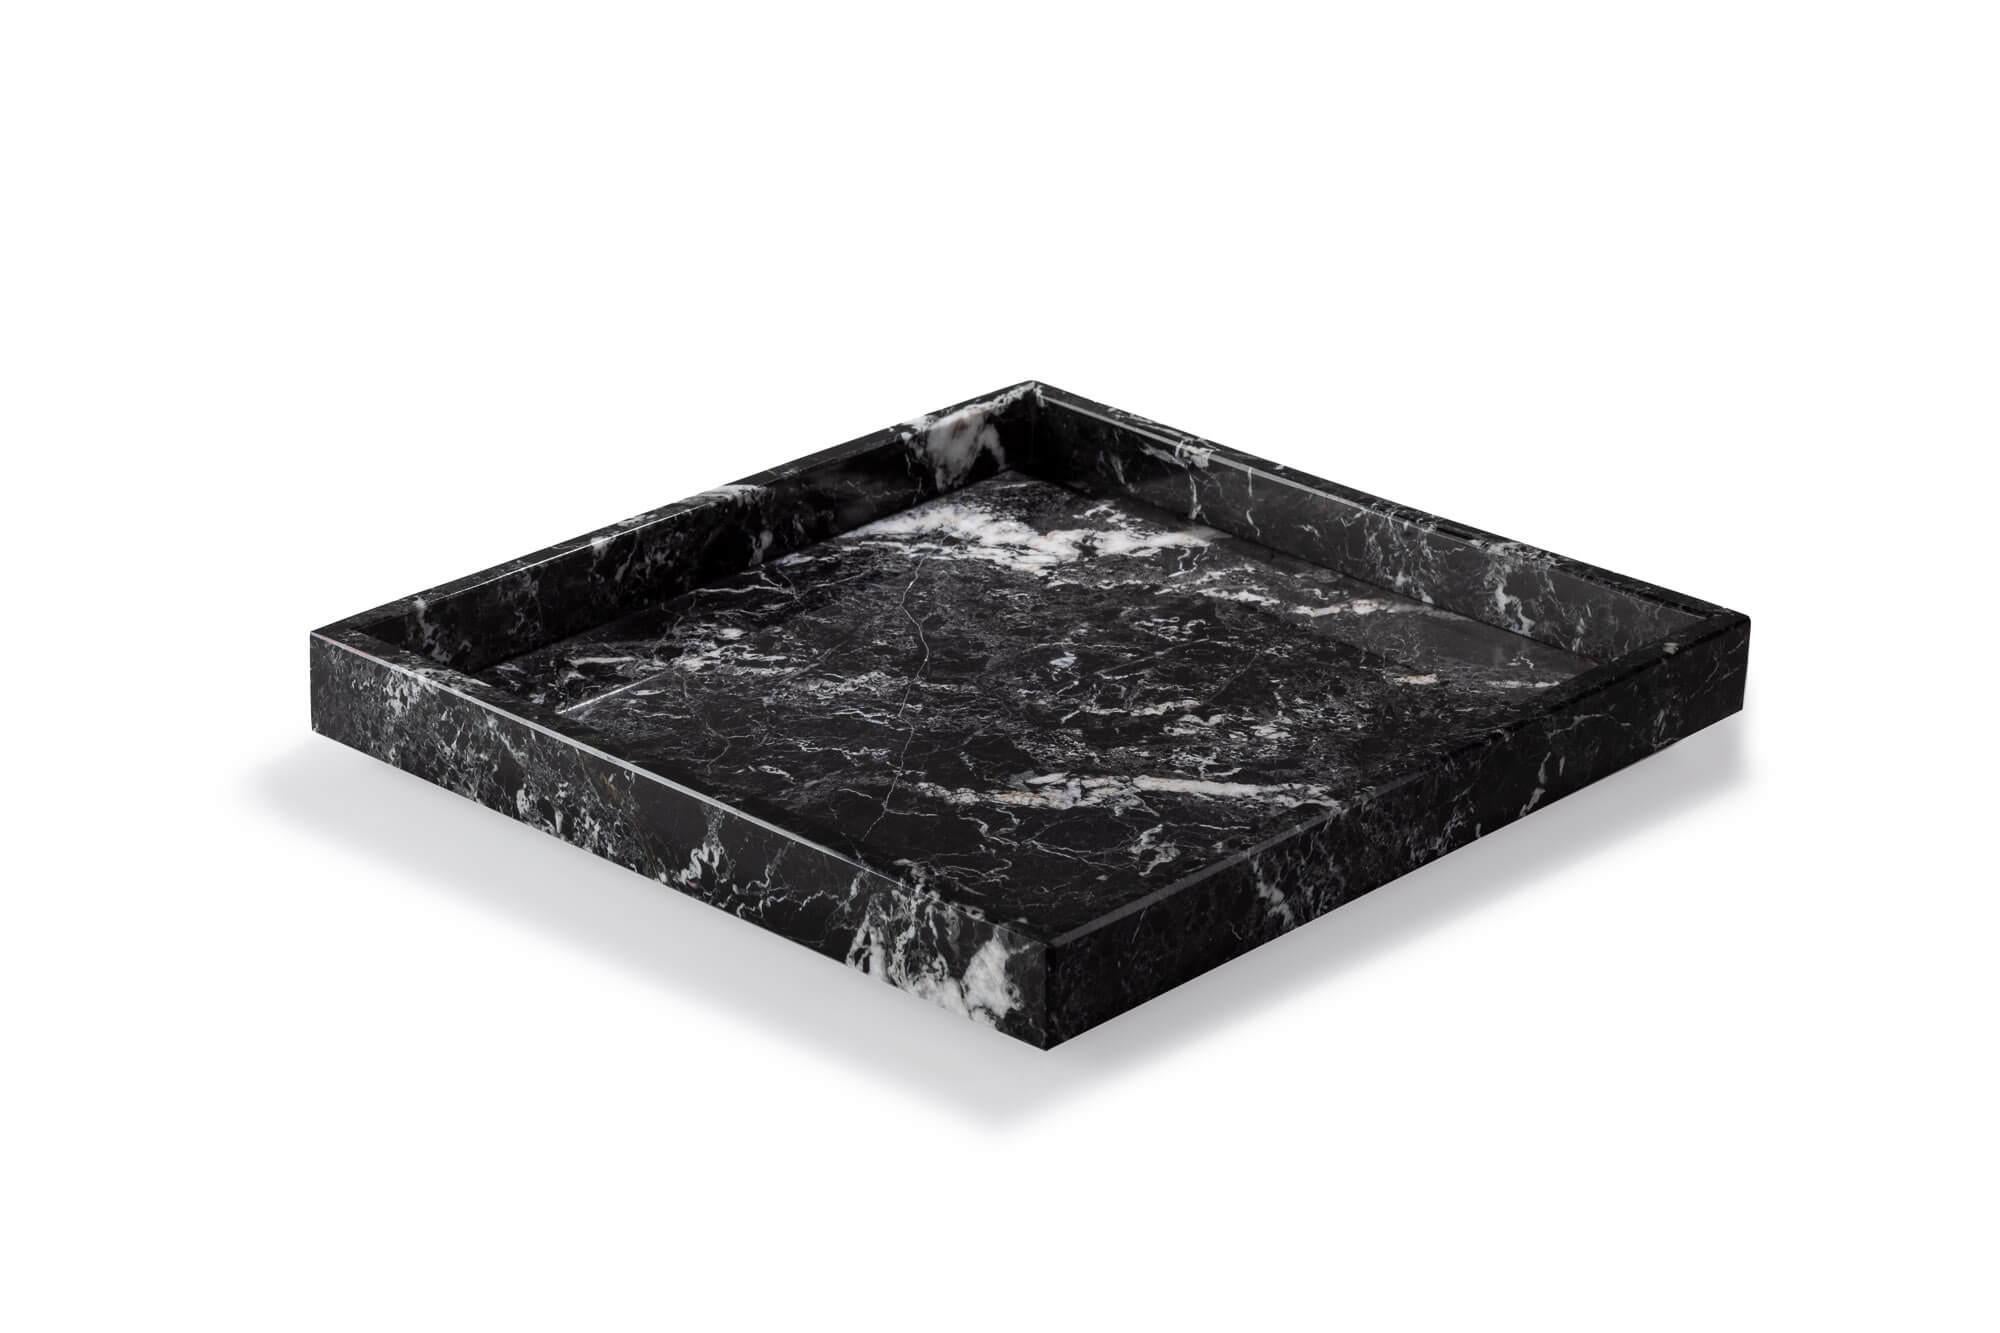 Designed to elegantly complement exclusive settings and stylish interiors, this square tray adds sophistication and elegance wherever it's placed. Integrated with a thin bottom plinth for easy manipulation, it embodies practicality and timeless